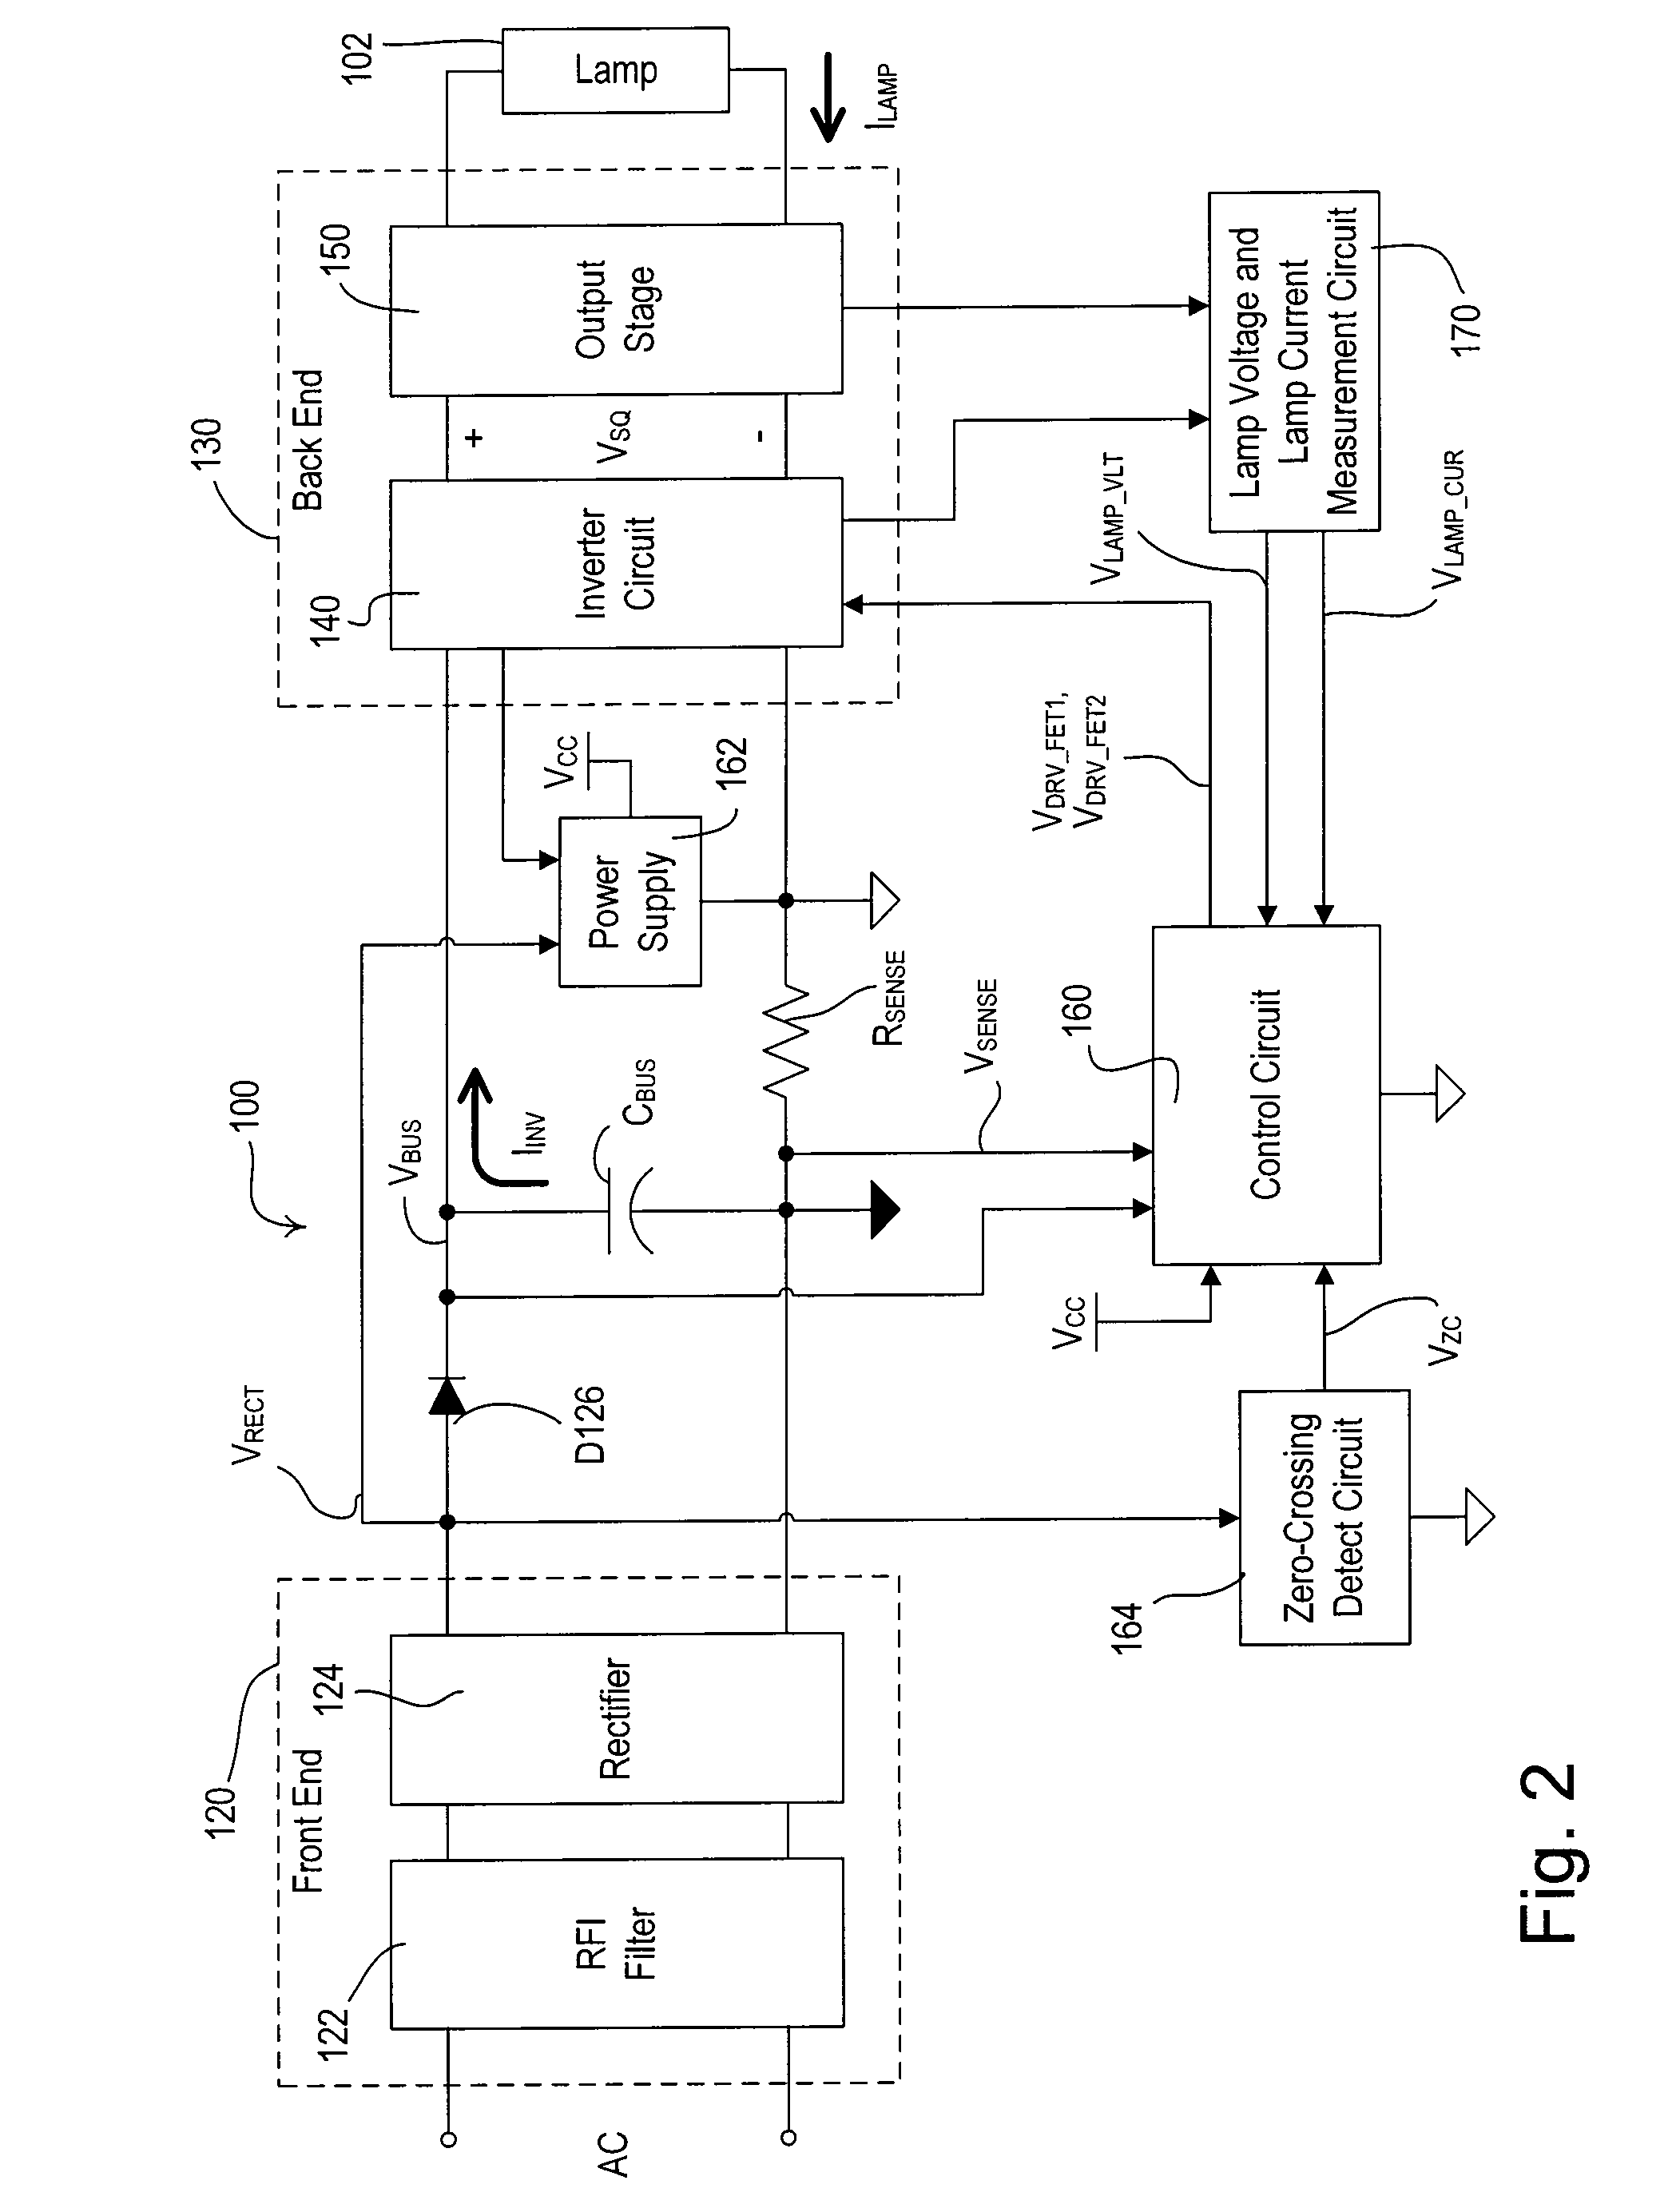 Measurement circuit for an electronic ballast